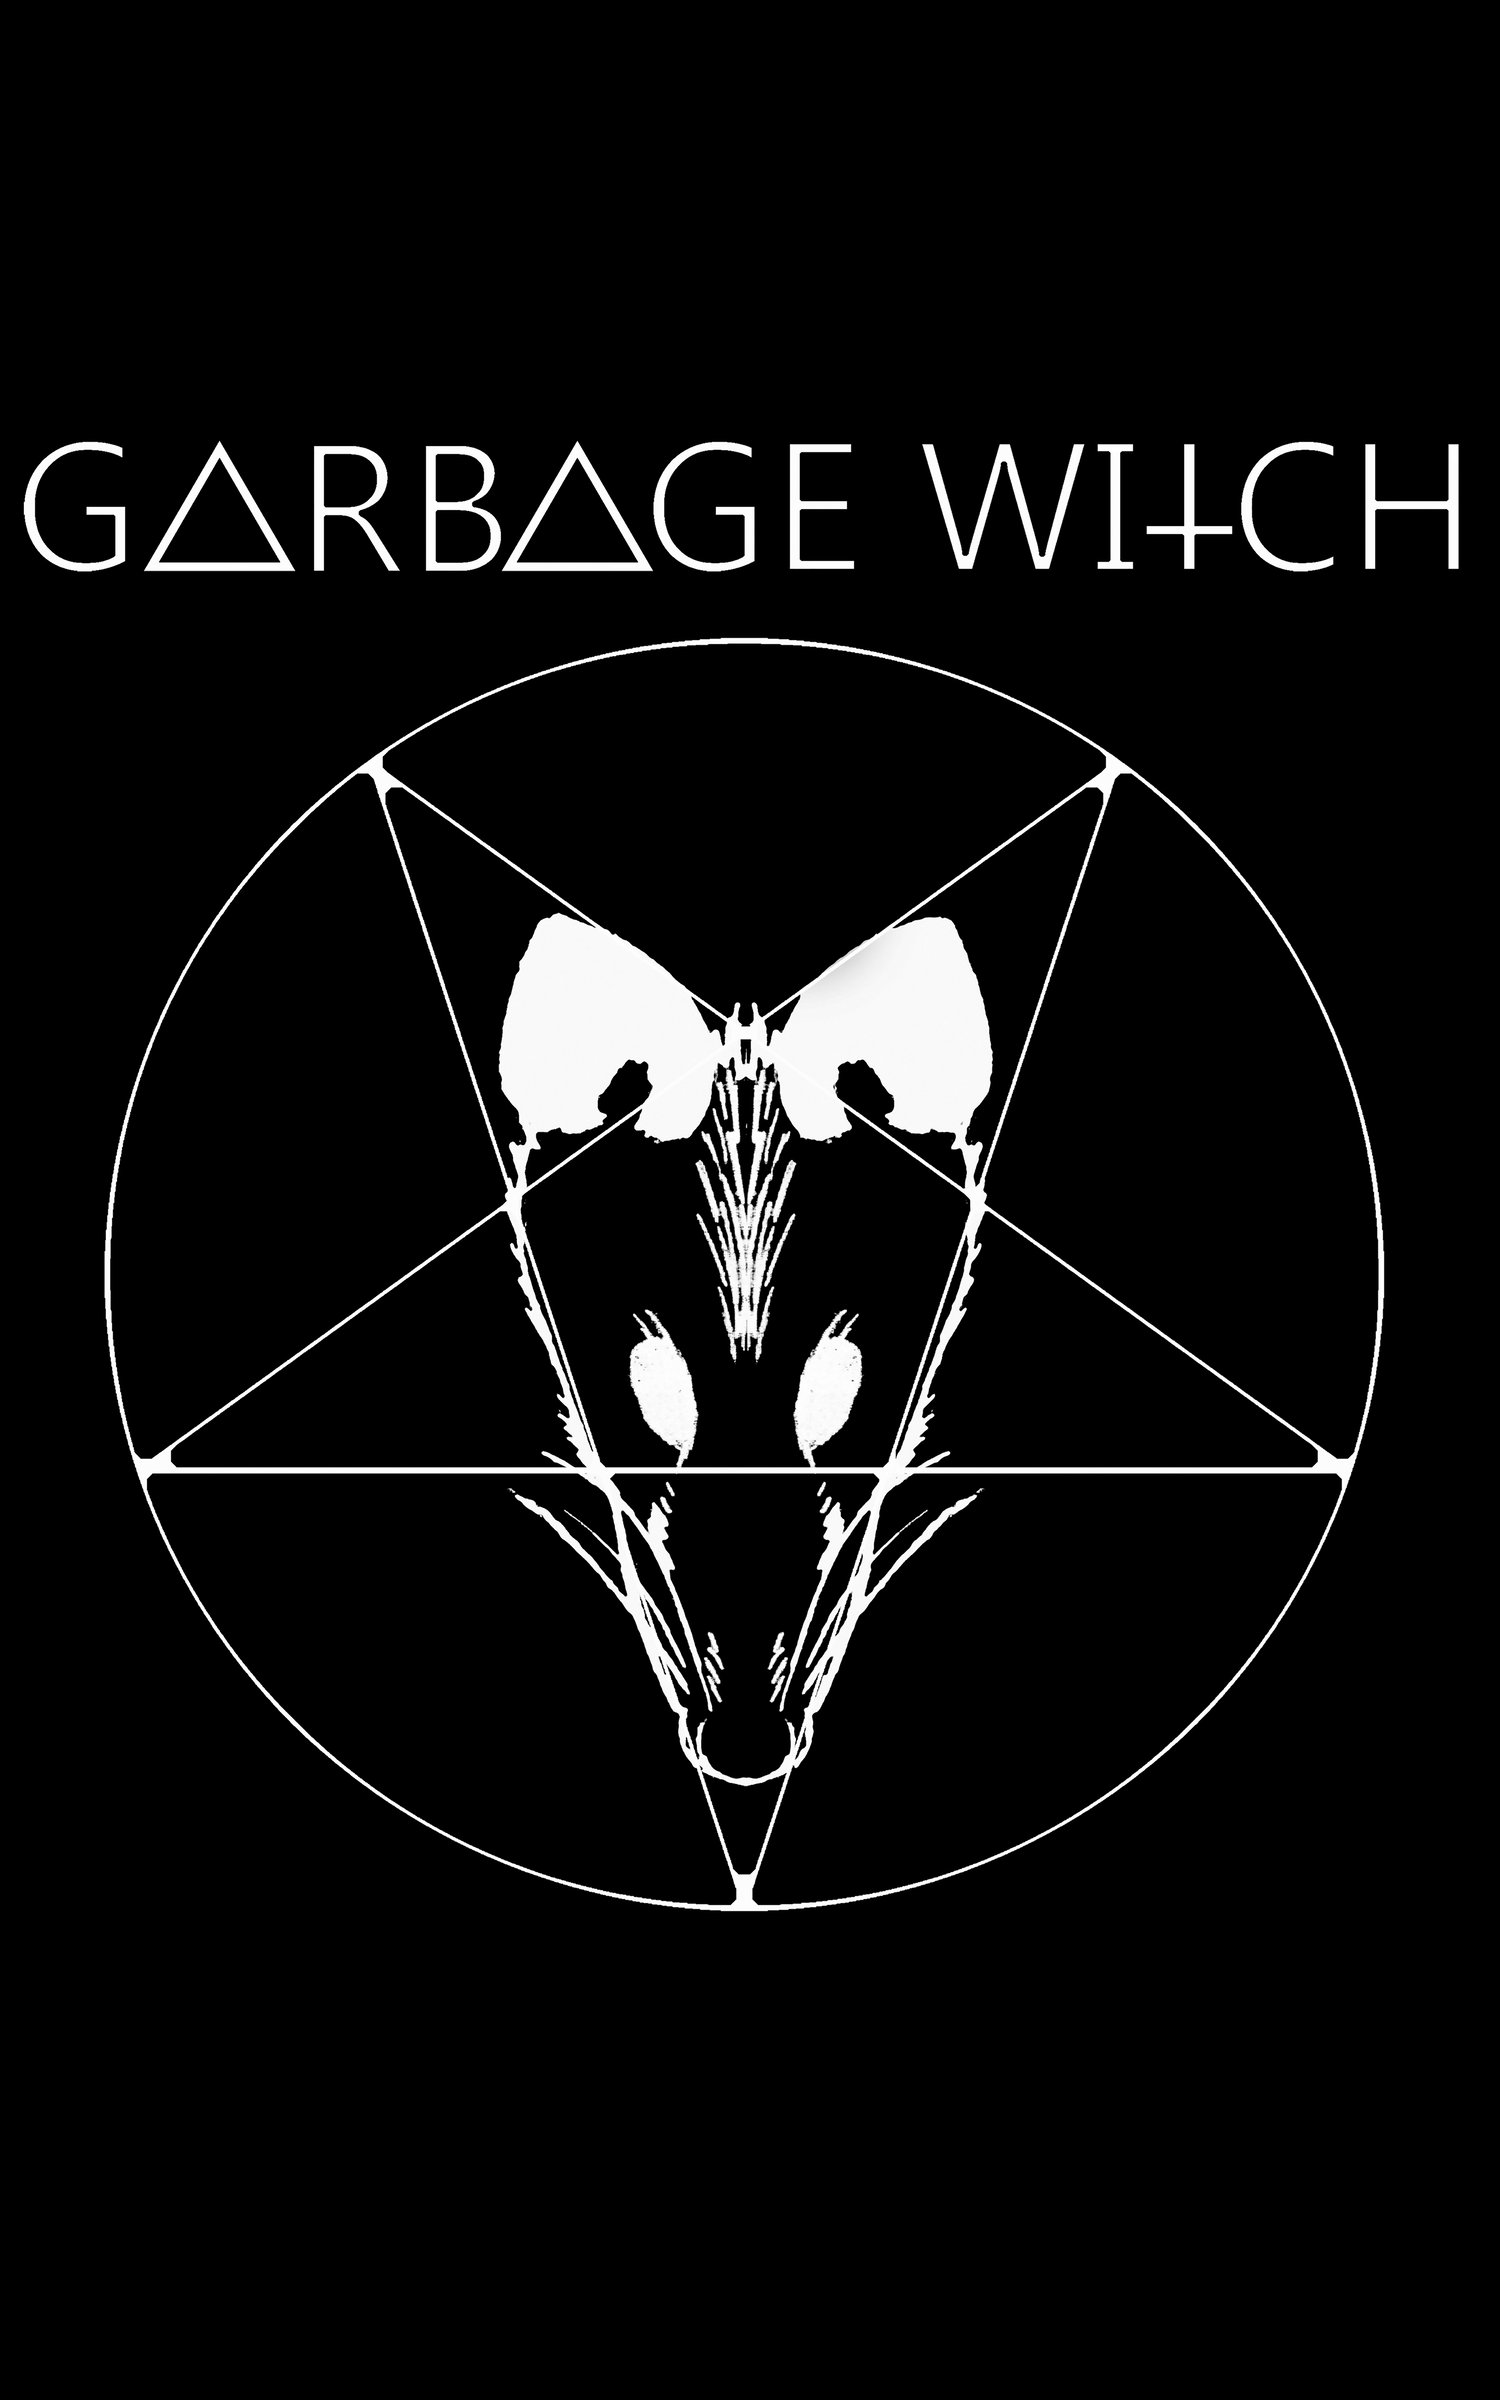 Garbage Witch Flags!